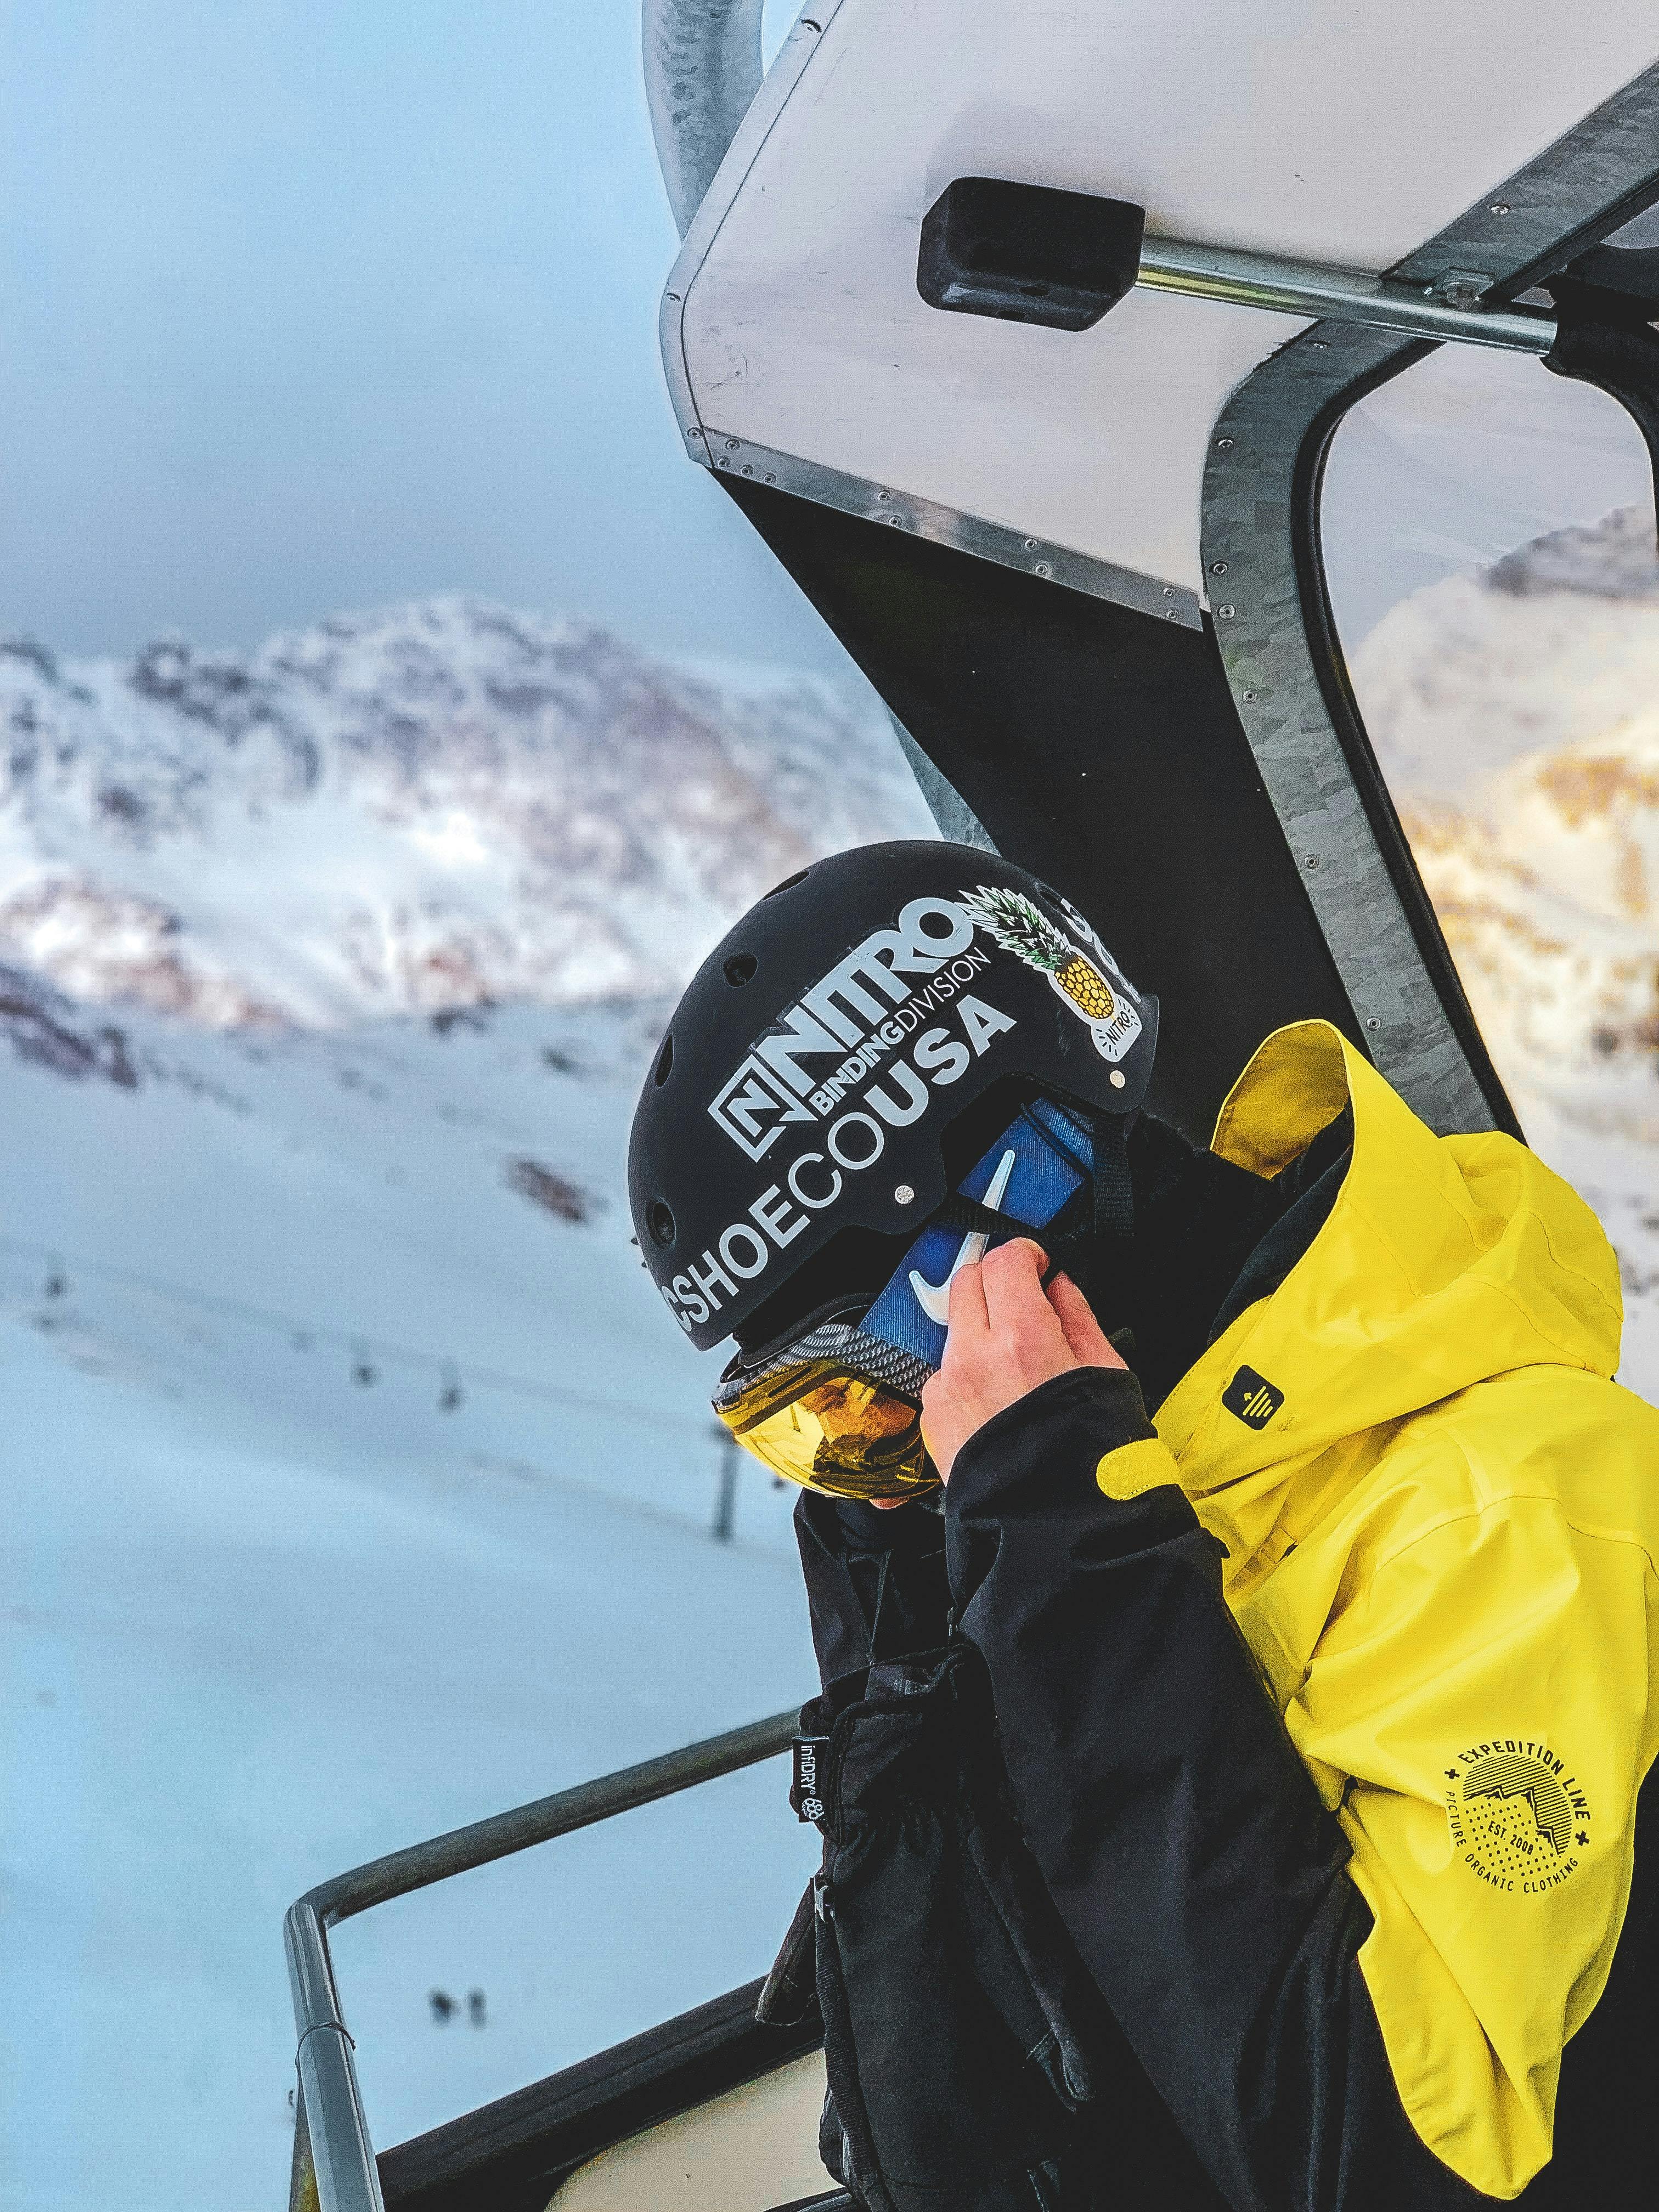 A snowboarder in a yellow jacket on a chairlift